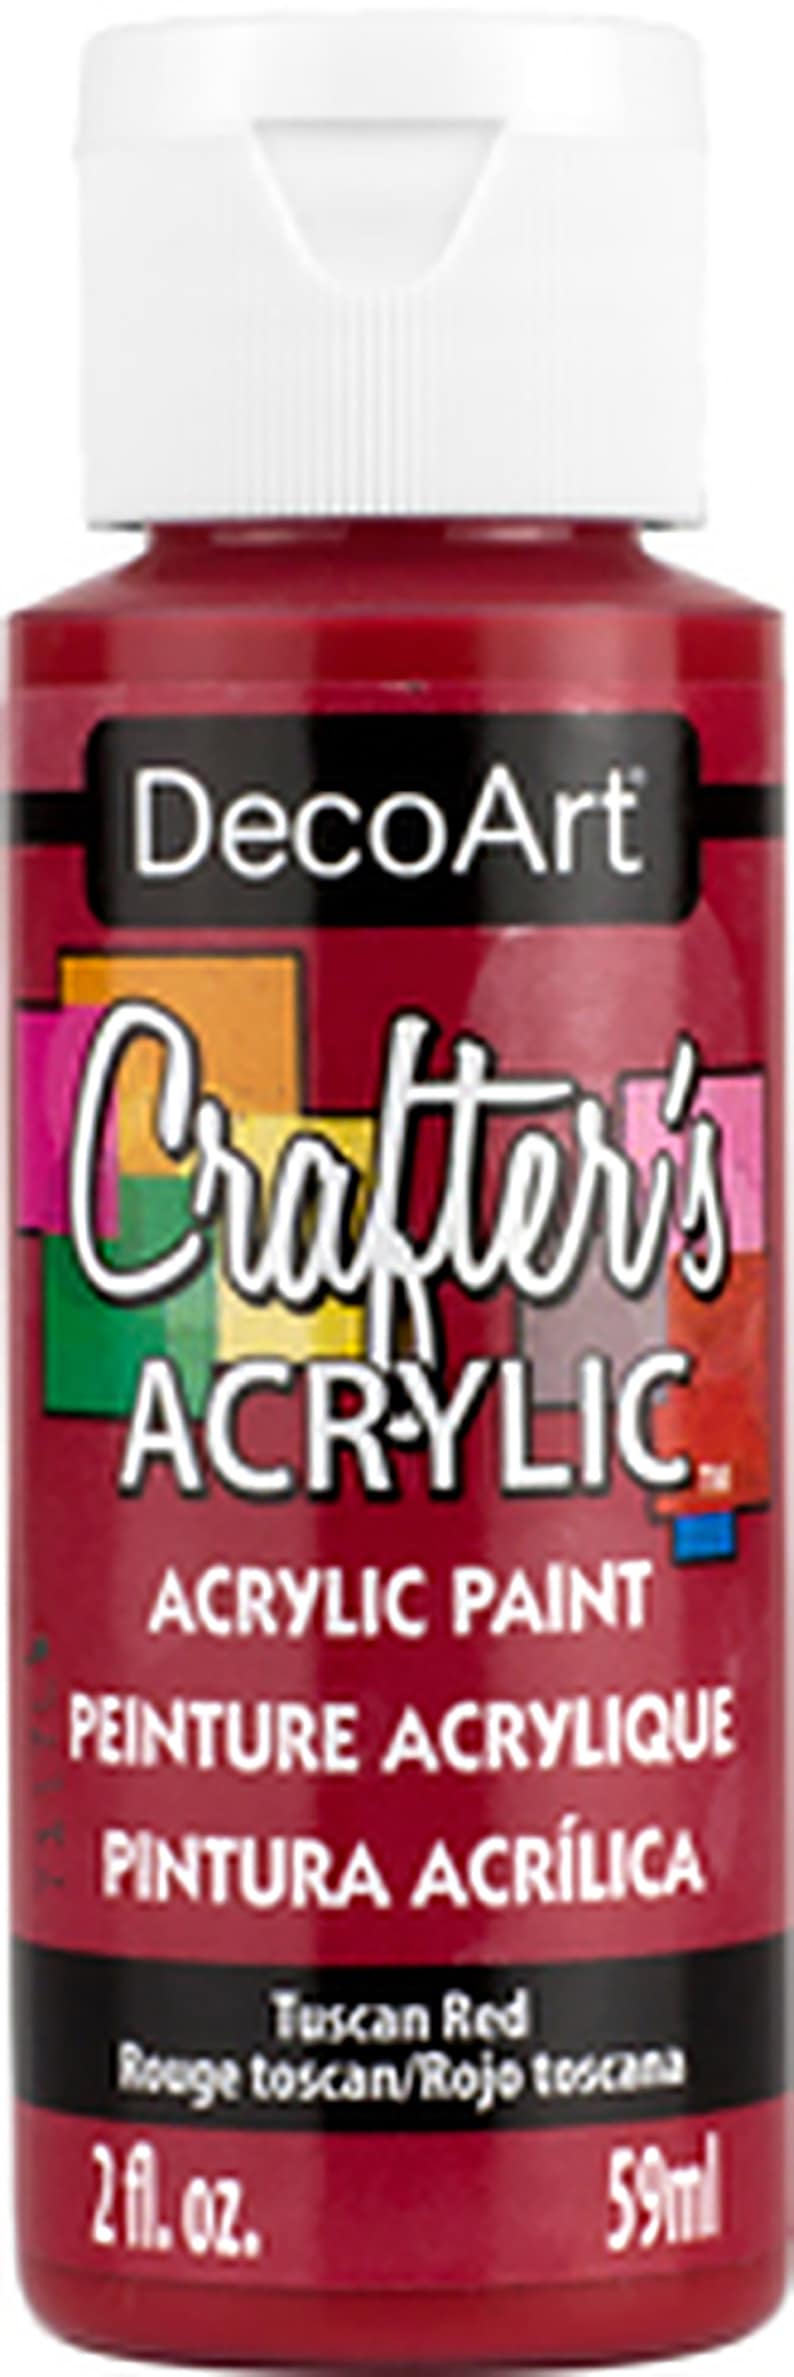 DecoArt Crafters Acrylic Paints Red Tones 59ml 2oz bottles Craft Paints Tuscan Red DCA126